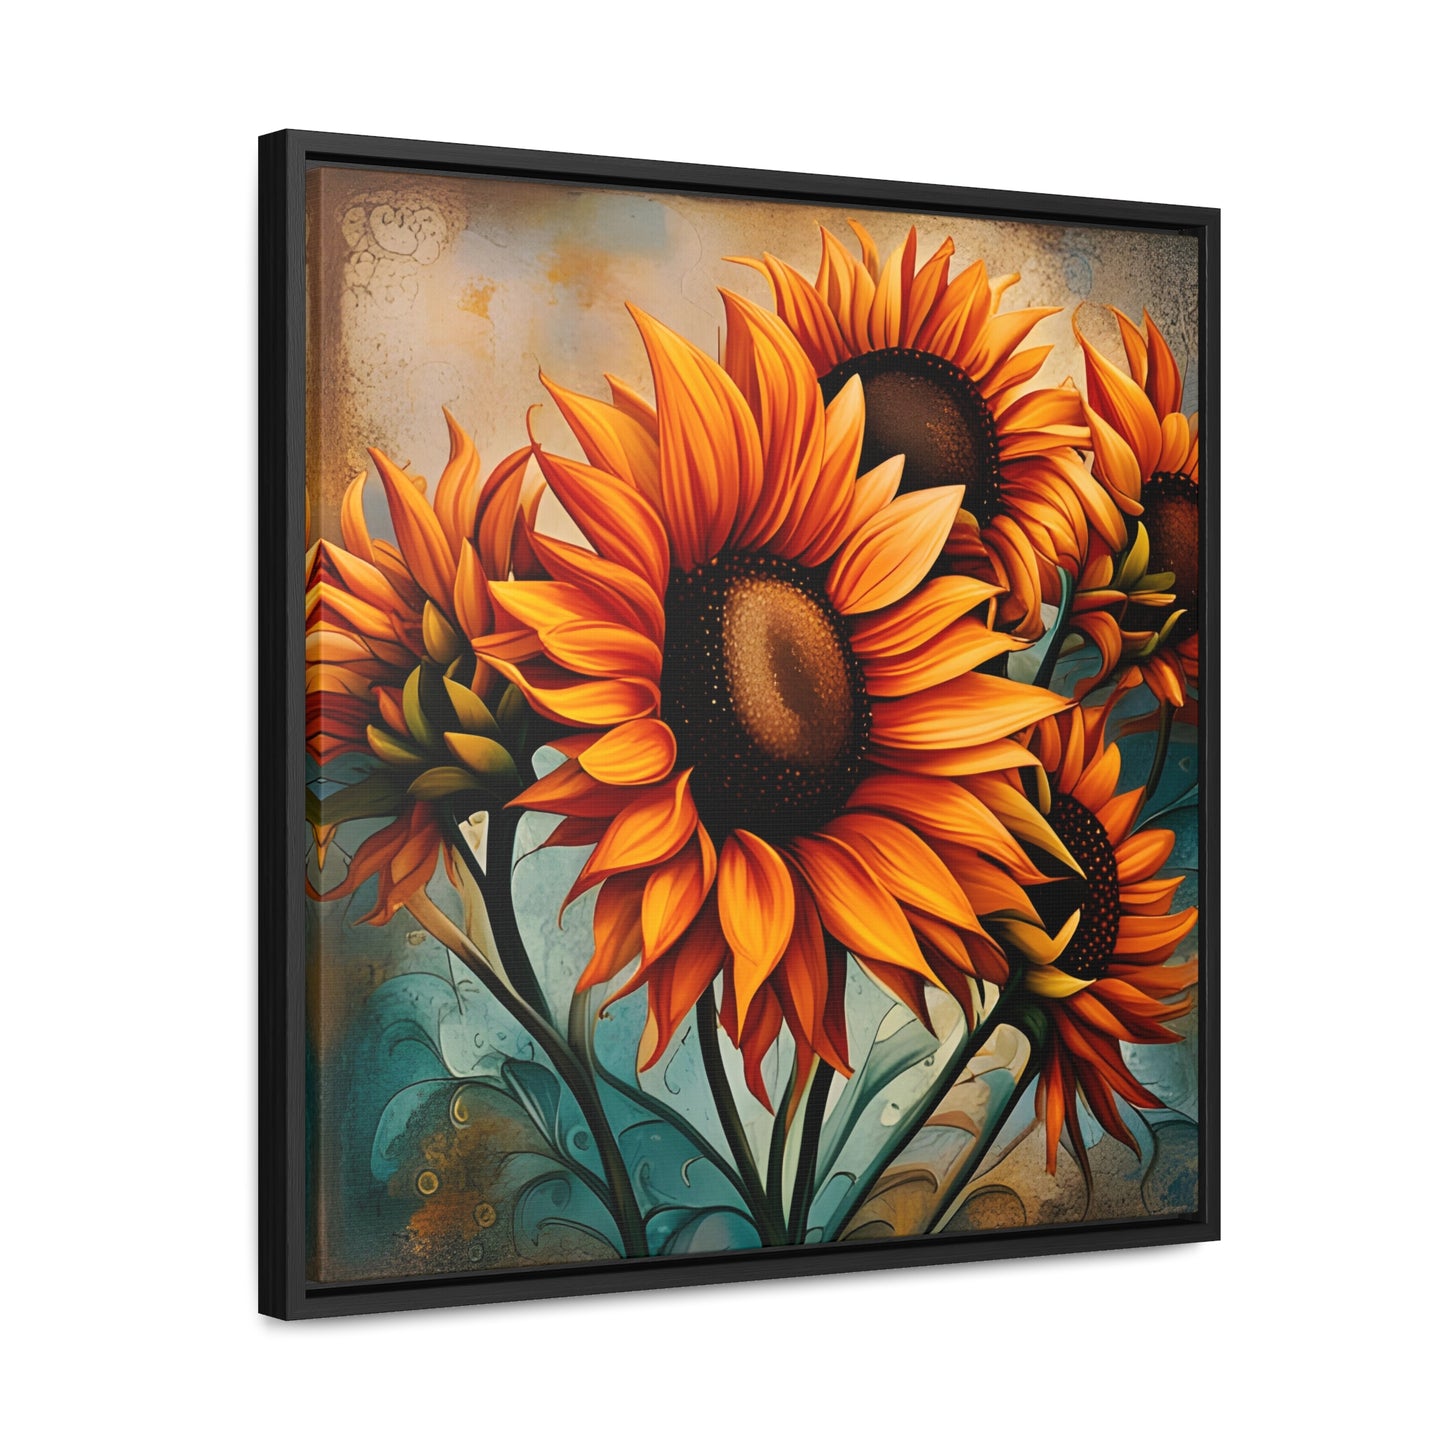 Sunflower Lovers Delight - Sunflower Crop on Distressed Blue and Copper Background Printed on Canvas in a Floating Frame side view